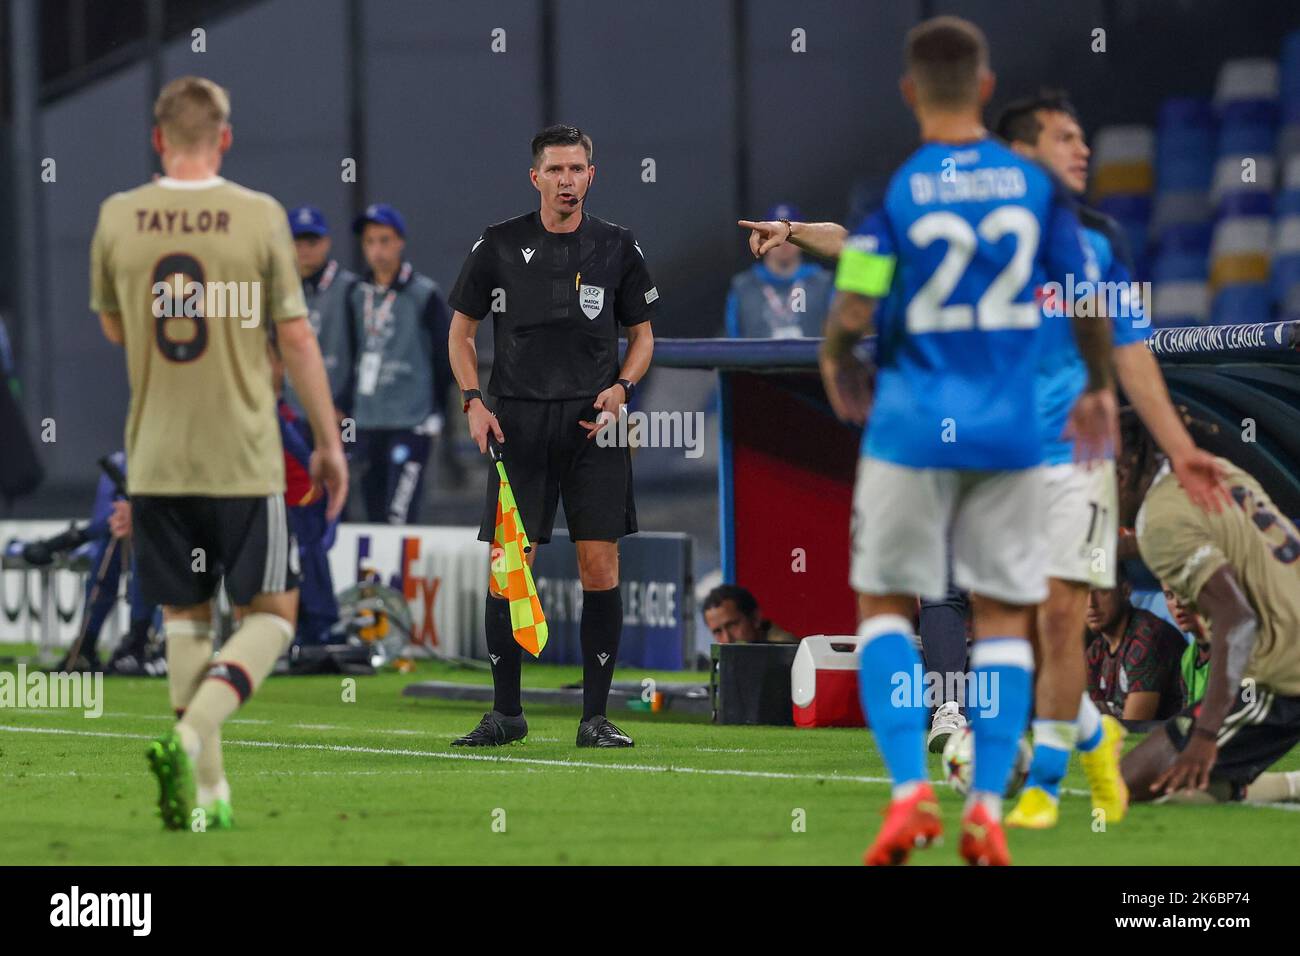 NAPELS, ITALY - OCTOBER 12: Assistant referee Stefan Lupp during the Group A - UEFA Champions League match between Napoli and Ajax at the Stadio Diego Armando Maradona on October 12, 2022 in Napels, Italy (Photo by Ben Gal/Orange Pictures) Stock Photo